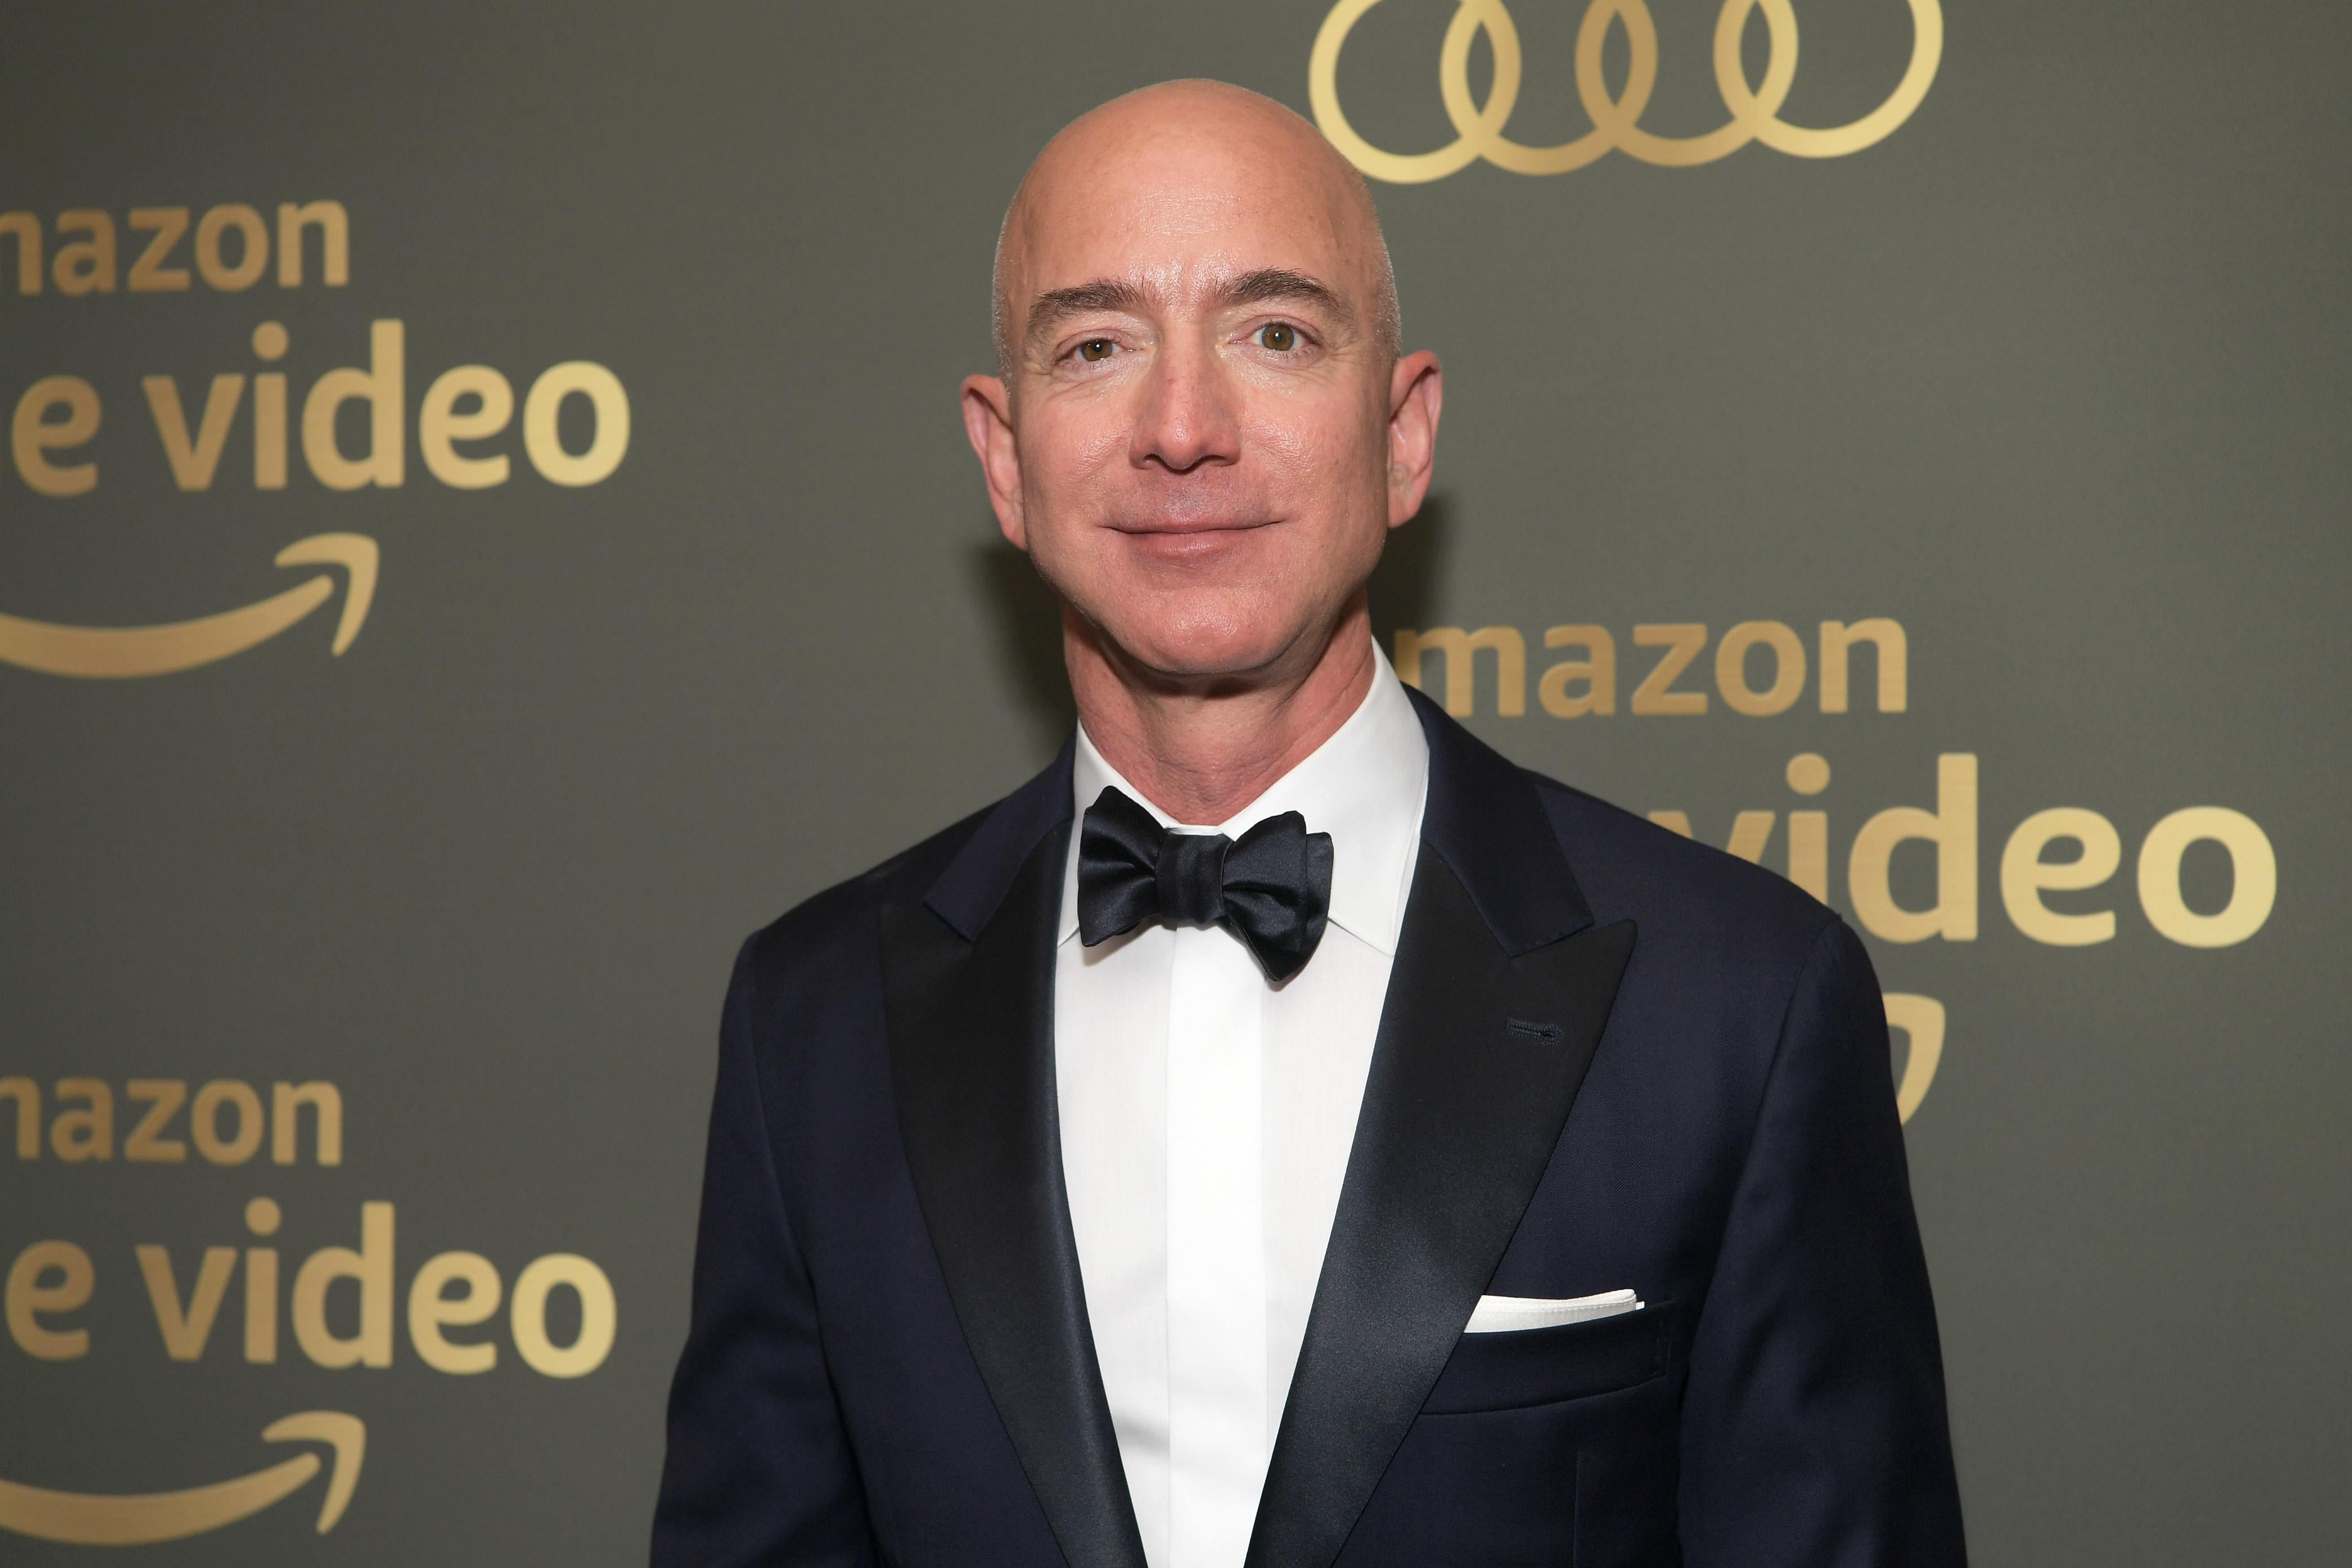 Blackmail Porn Selfies - The National Enquirer tried to blackmail Jeff Bezos with threat to publish  racy selfies sent to mistress.